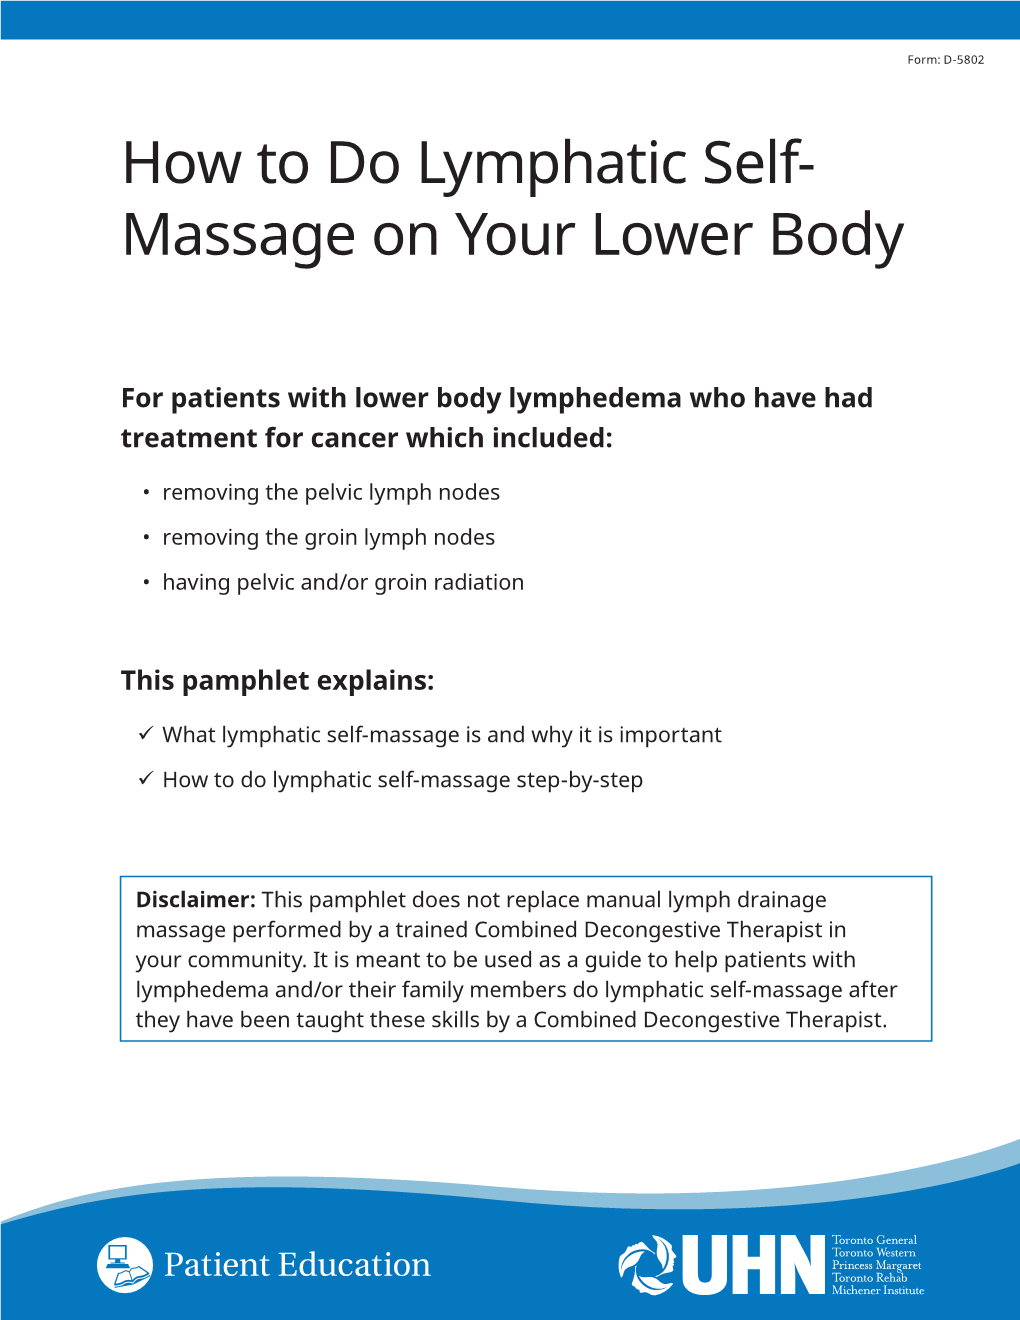 How To Do Self Lymphatic Massage On Your Lower Body Docslib